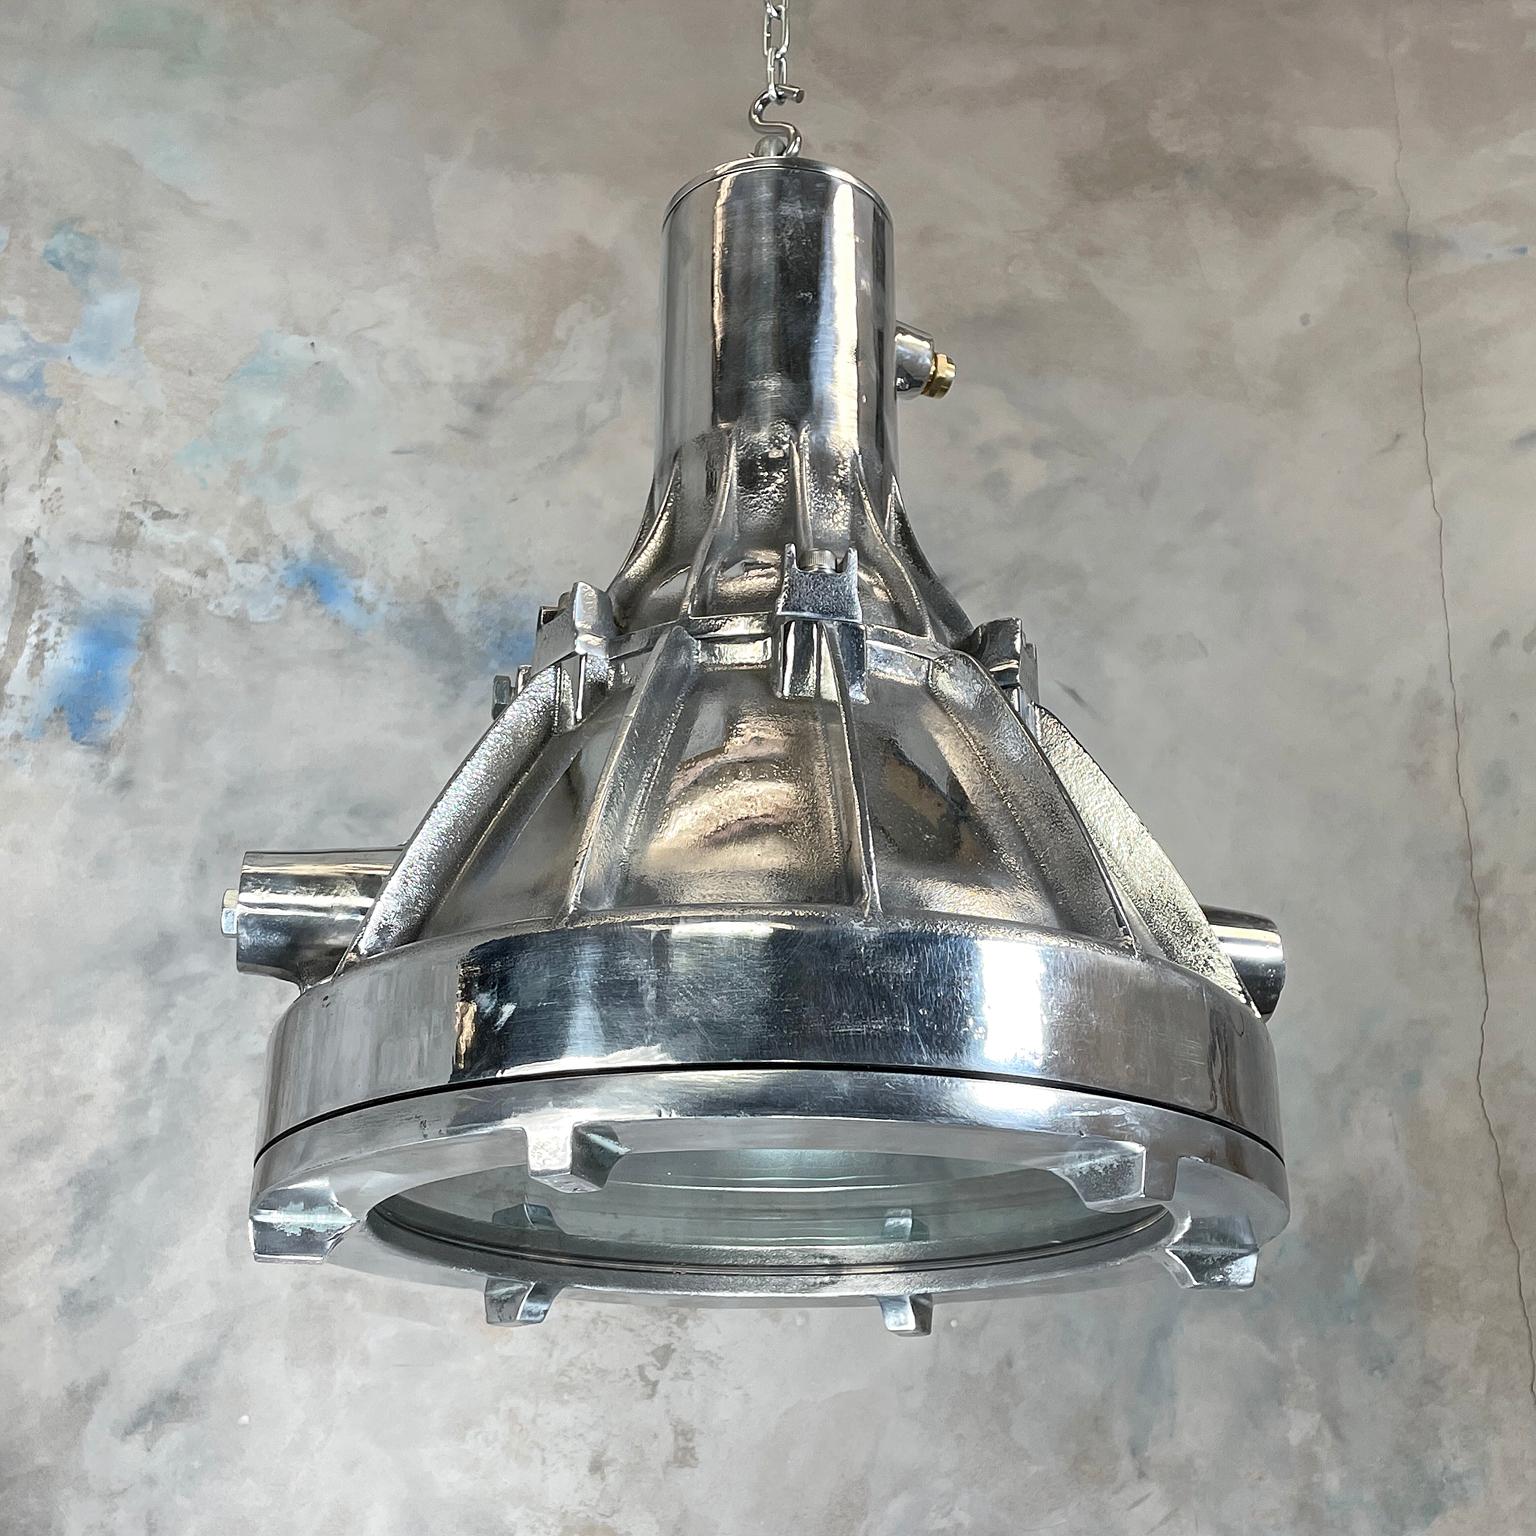 A large cast aluminium explosion proof pendant built to with stand the most adverse conditions at sea.

These lamps were reclaimed from a super tanker that would have transported hazardous cargo.

The weight of these lamps is approximate 18kg